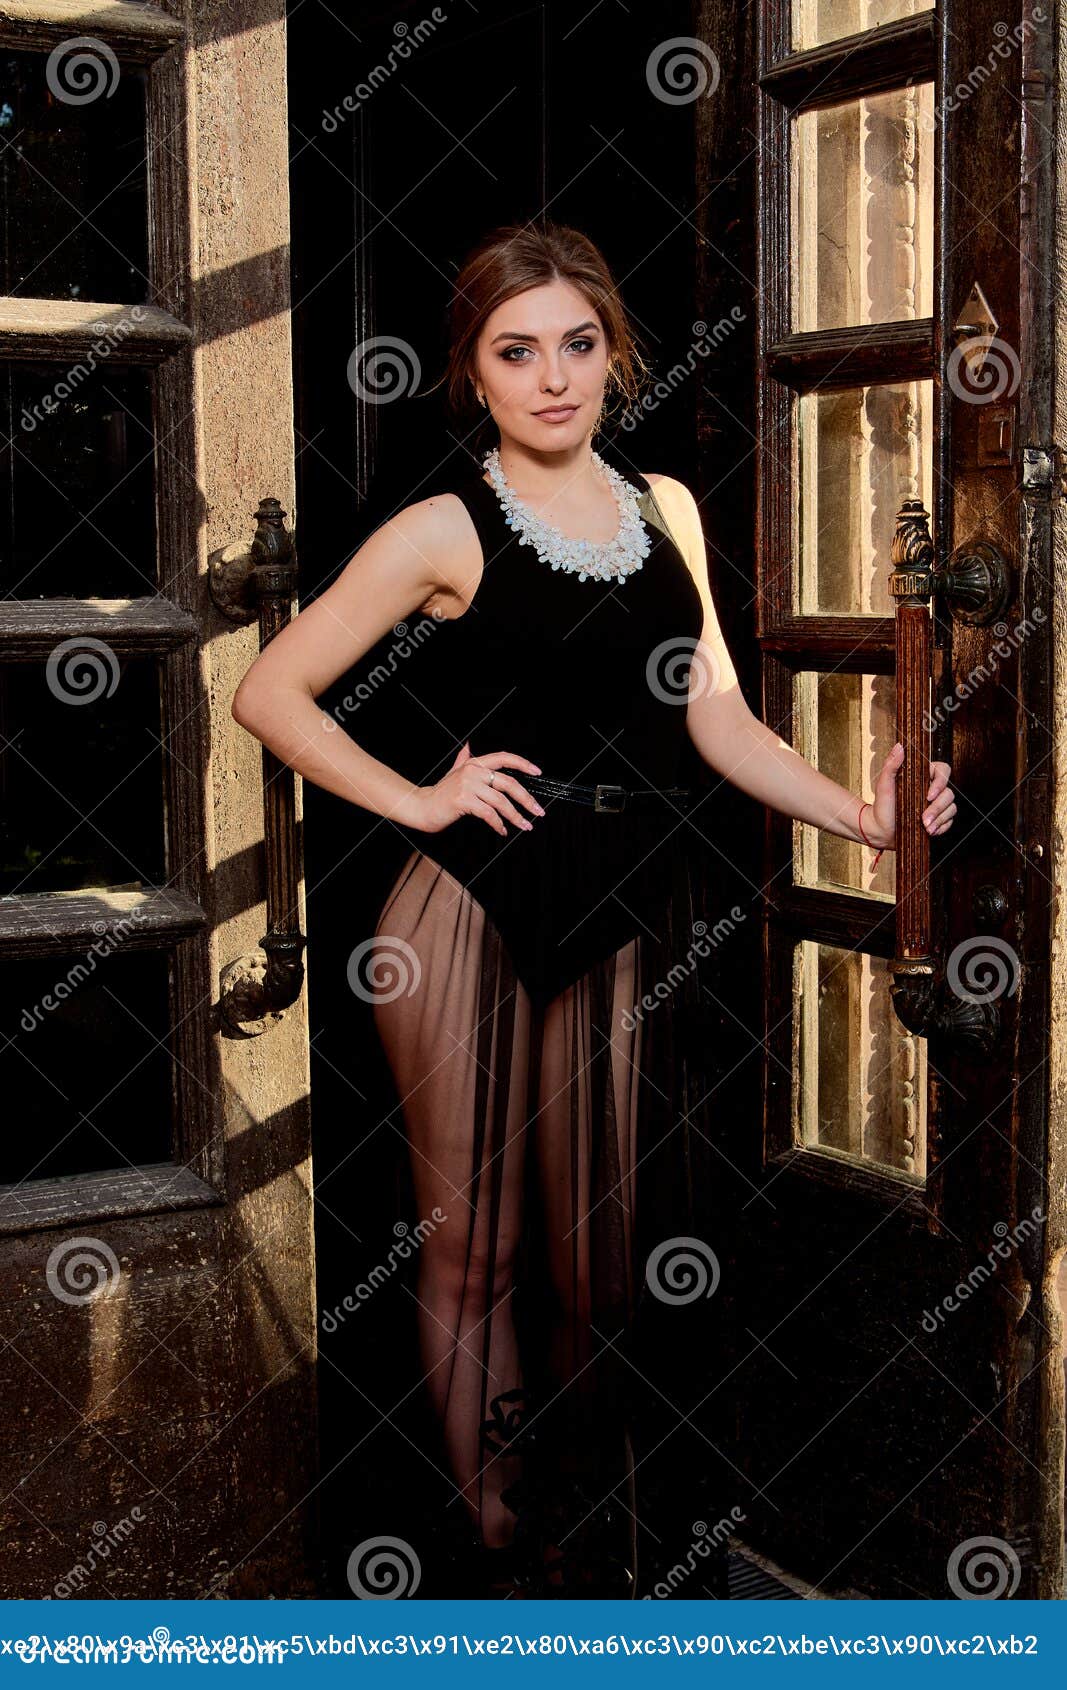 Young attractive woman in the black dress. Young woman portrait. Young attractive woman in the see-through, transparent, transpicuous, diaphanous black dress posing at summer sunny day outdoor at the old double door. Fashion woman. Young woman modern portrait